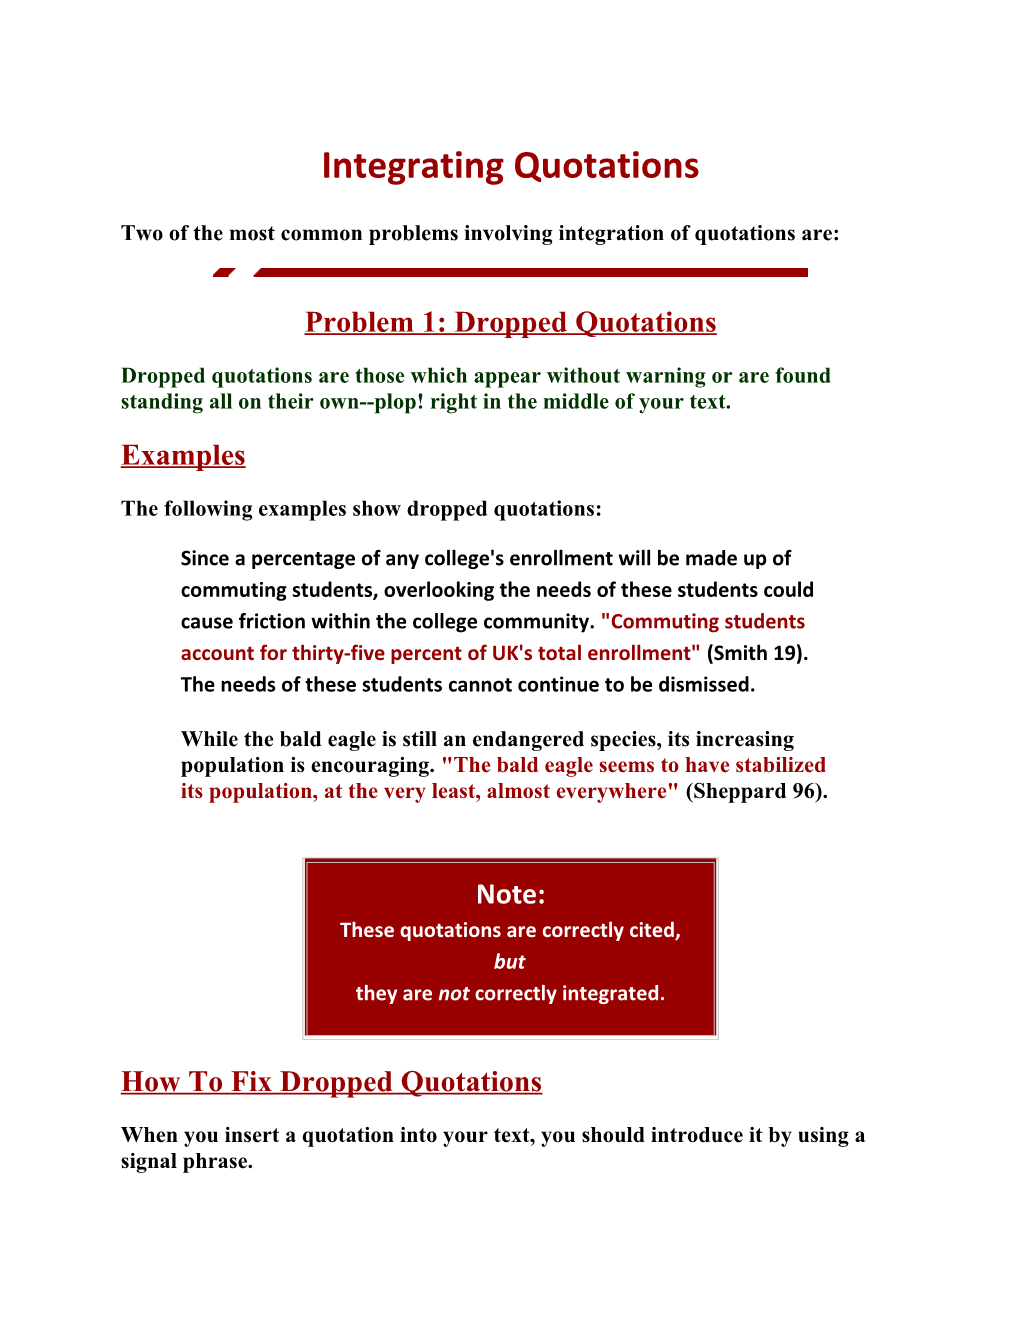 Two of the Most Common Problems Involving Integration of Quotations Are